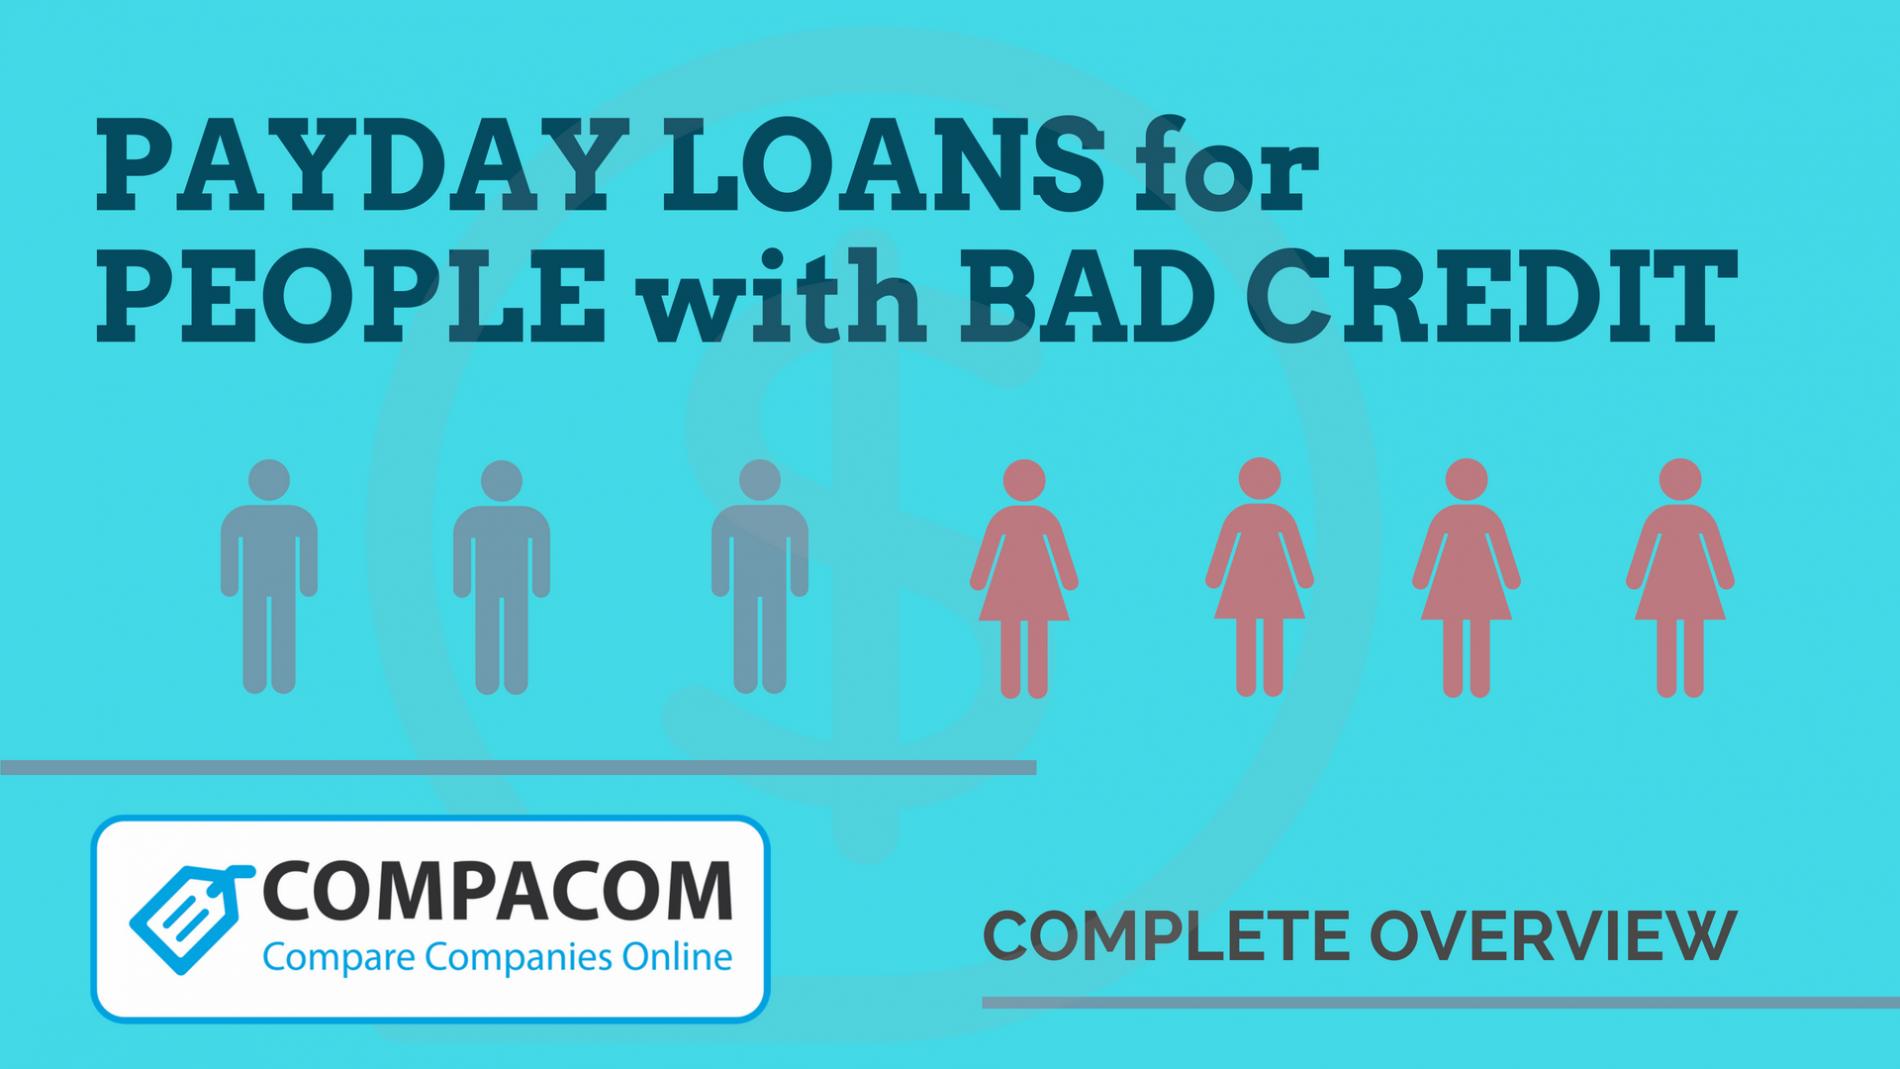 Up To 1 000 Online Payday Loans For Bad Credit Compacom Compare Companies Online